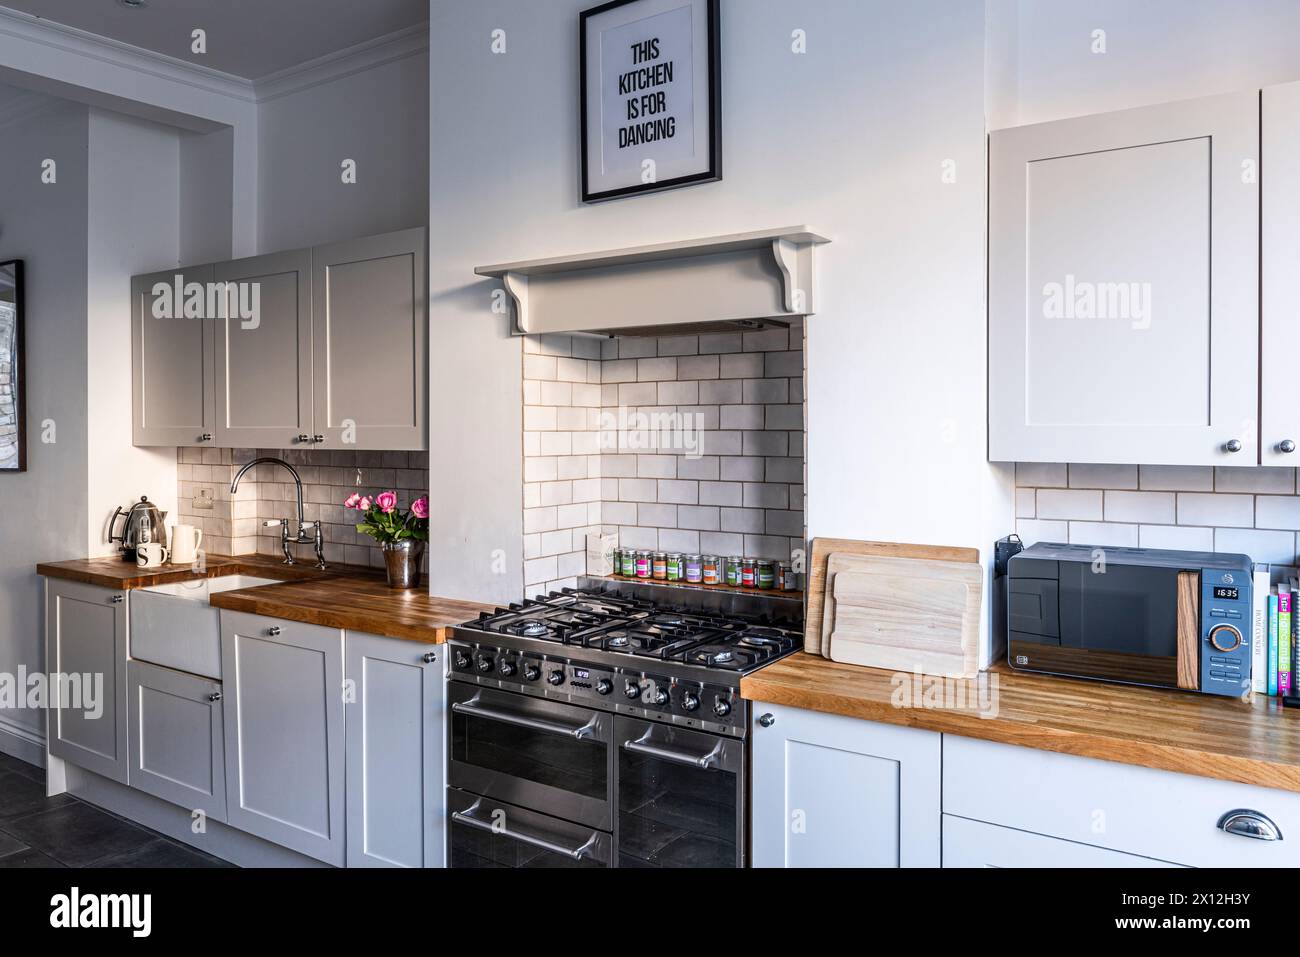 'This kitchen is for dancing' in London flat, UK Stock Photo